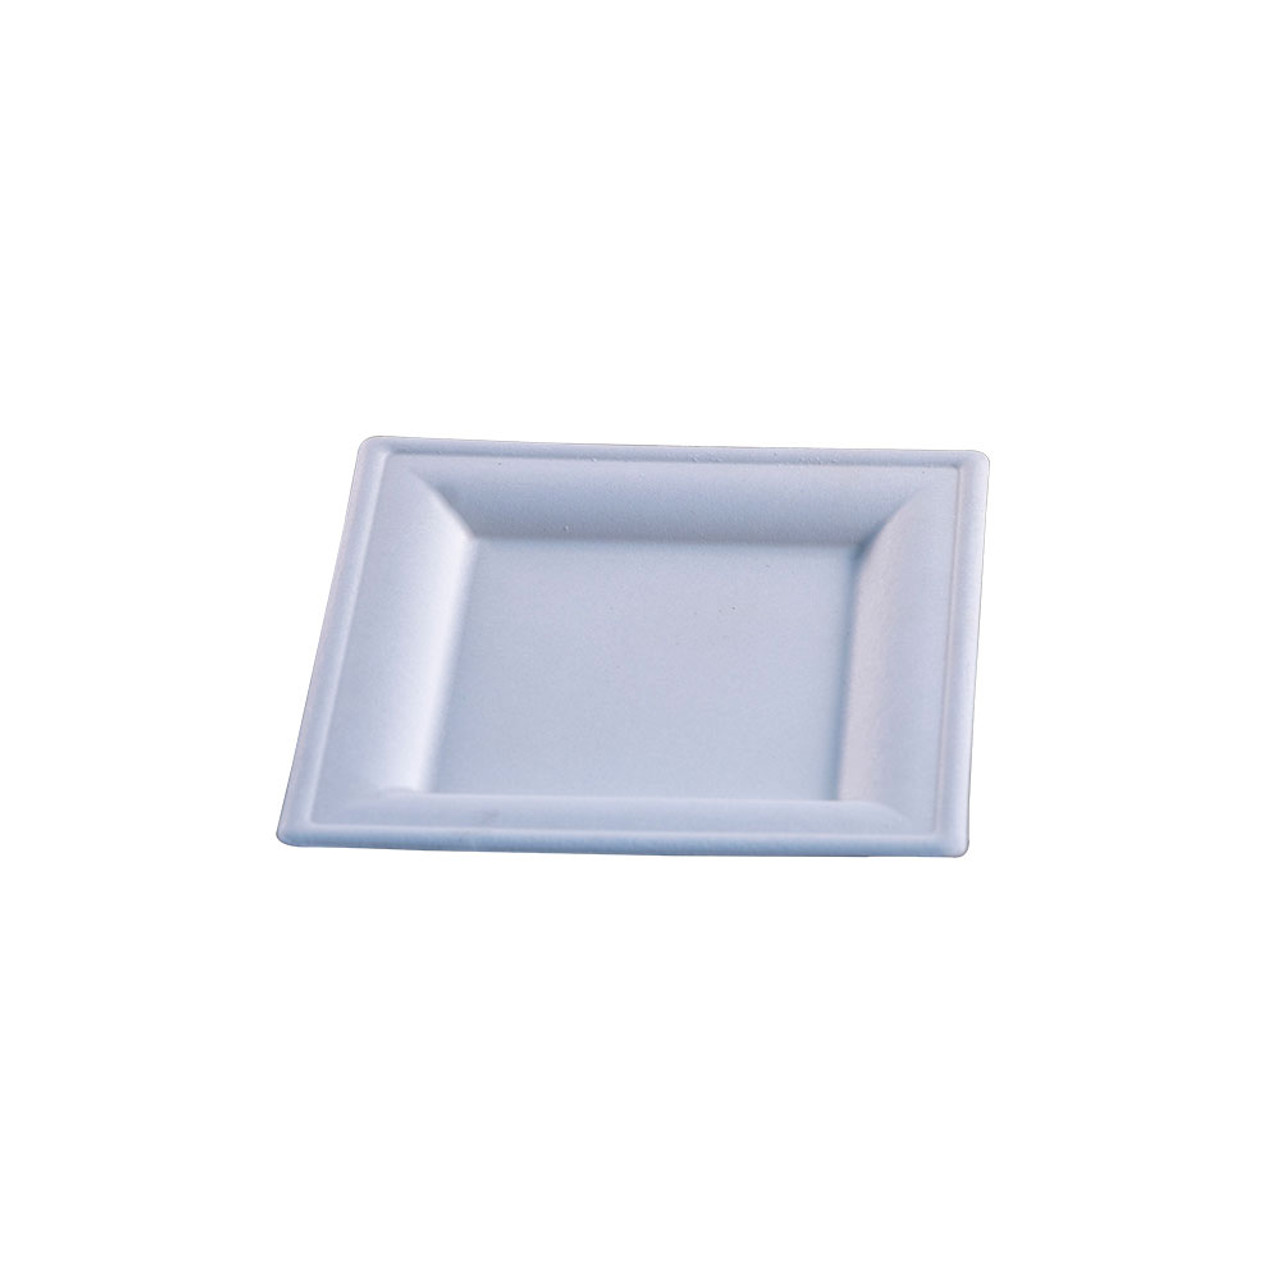 https://cdn11.bigcommerce.com/s-g3i86bef61/images/stencil/1280x1280/products/2702/1144/Empress-EDP-66-Square-Disposable-Plate__00217.1662048567.jpg?c=1